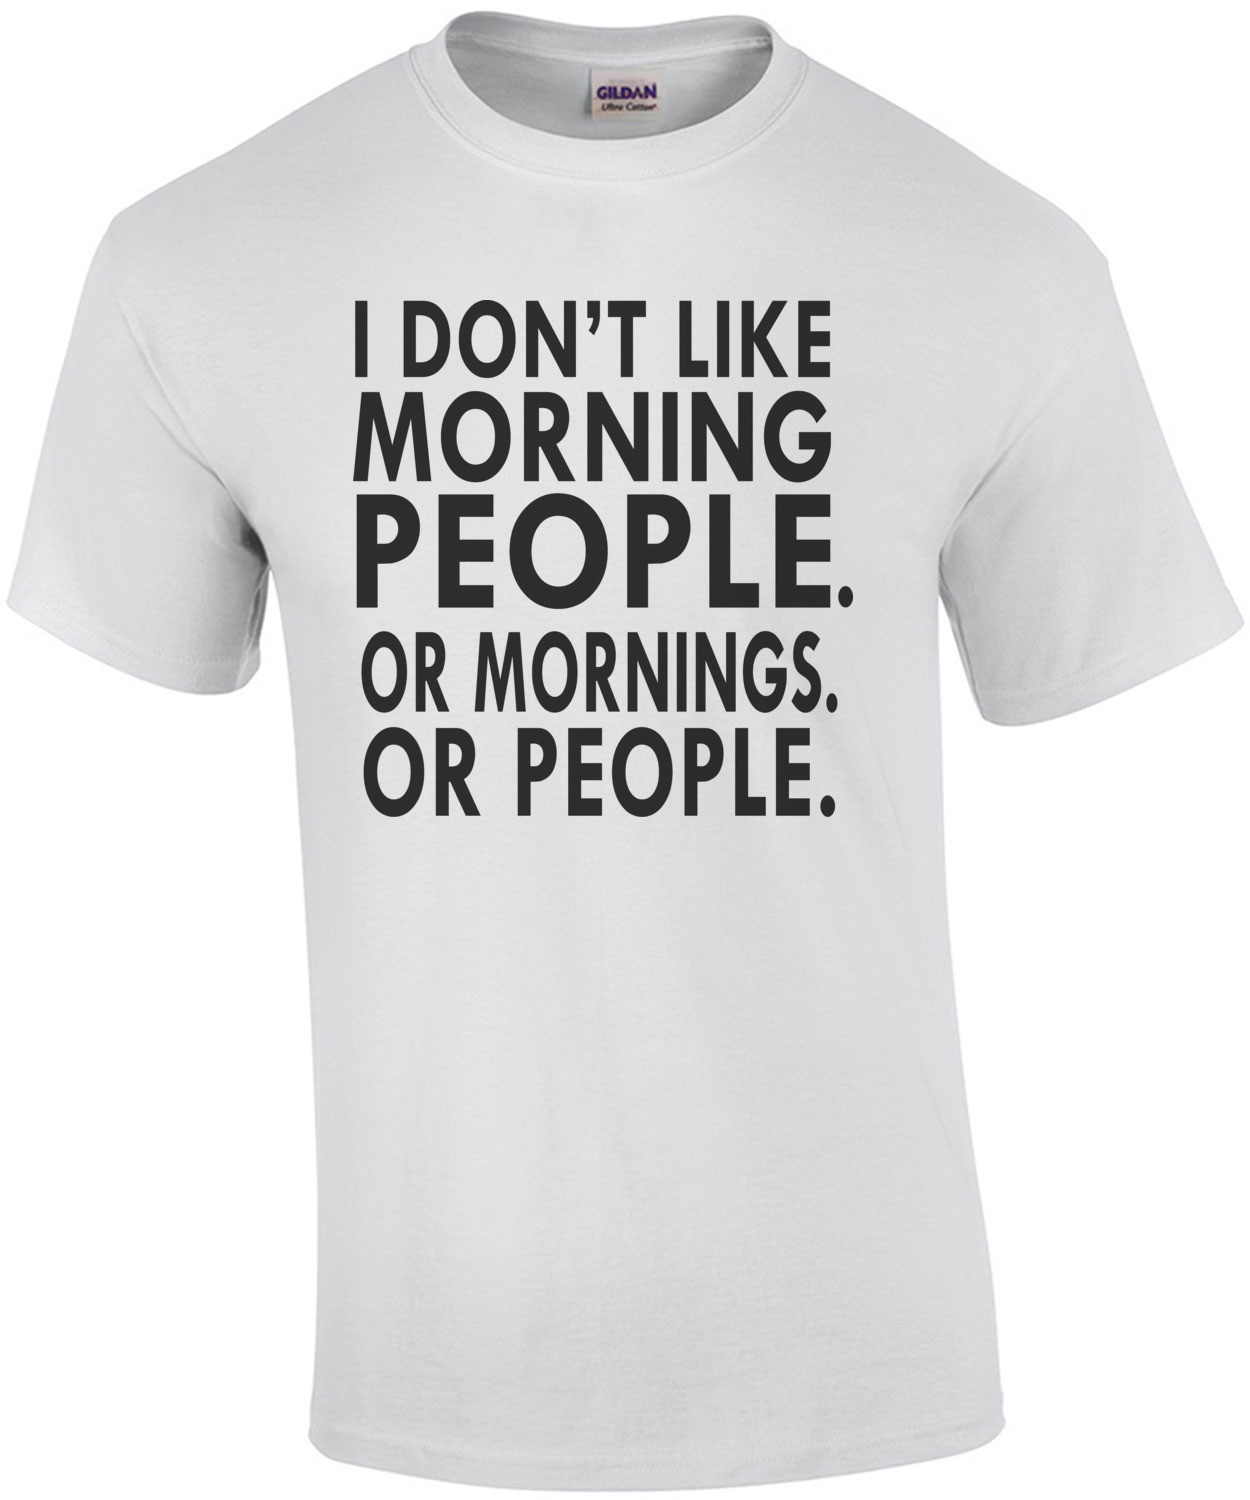 I don't like morning people. Or mornings. Or people. T-Shirt